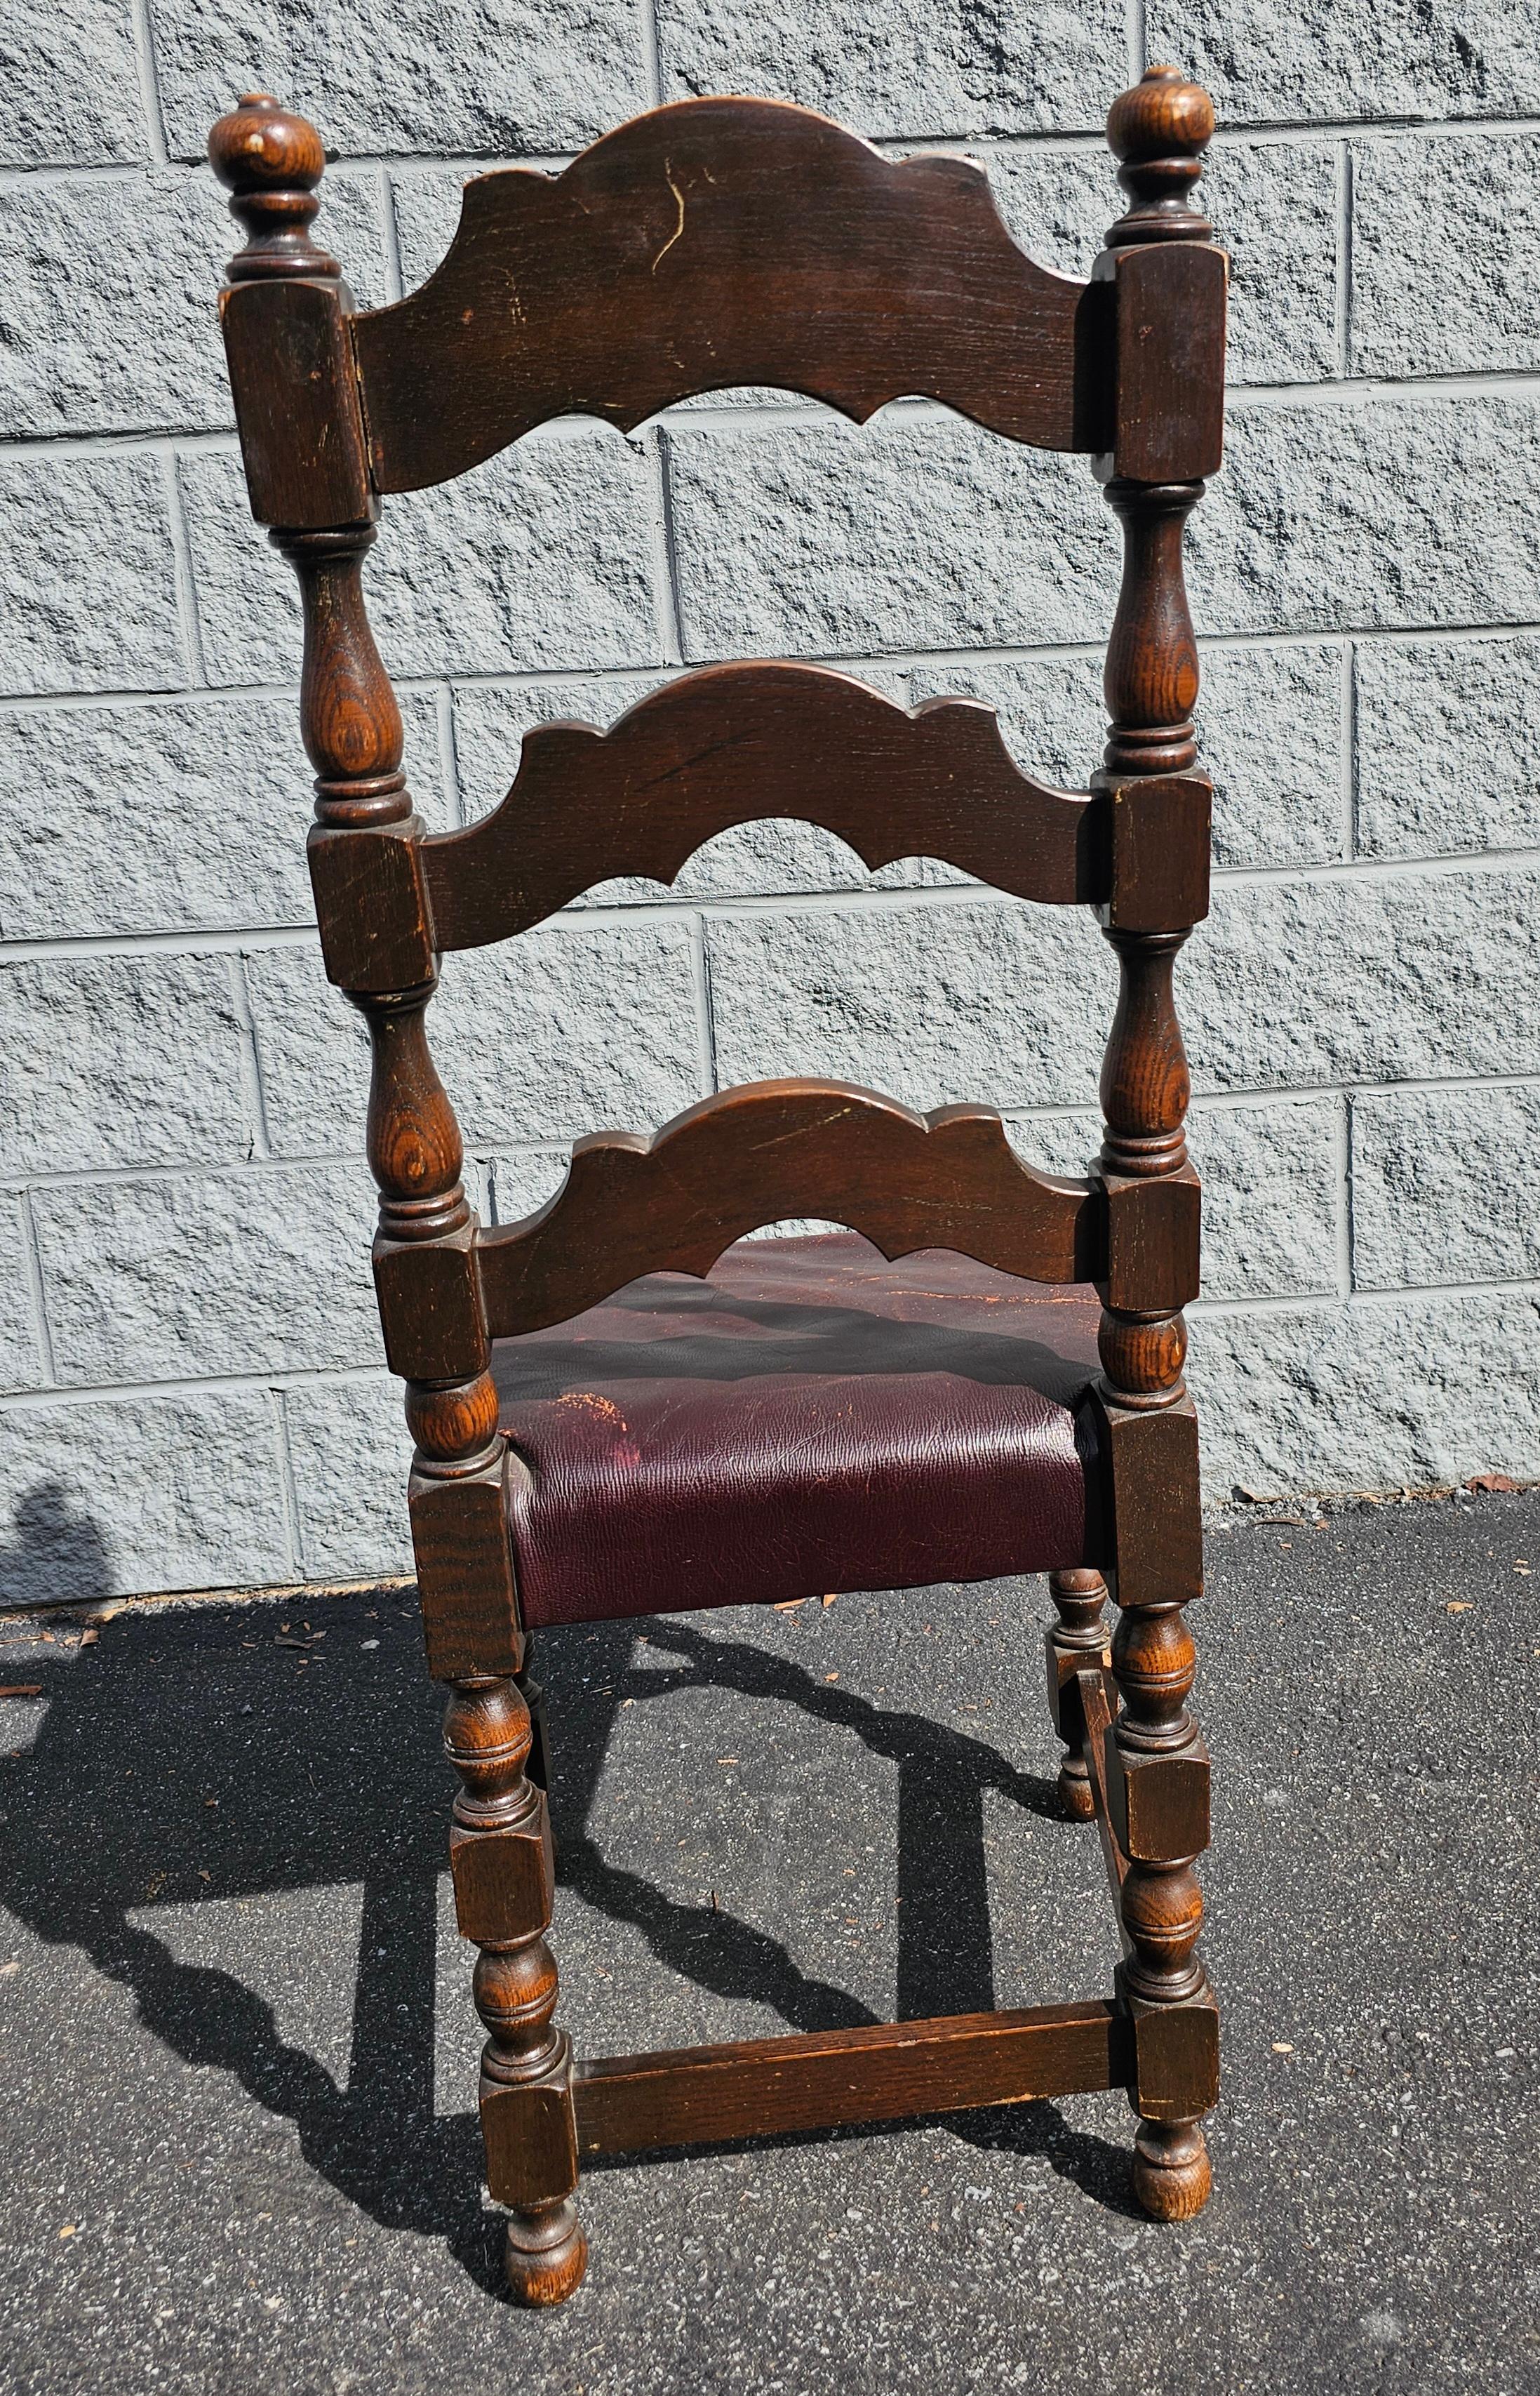 Jacobean Revival Style Leather Upholstered Oak Side Chair, 19th-20th Century In Good Condition For Sale In Germantown, MD